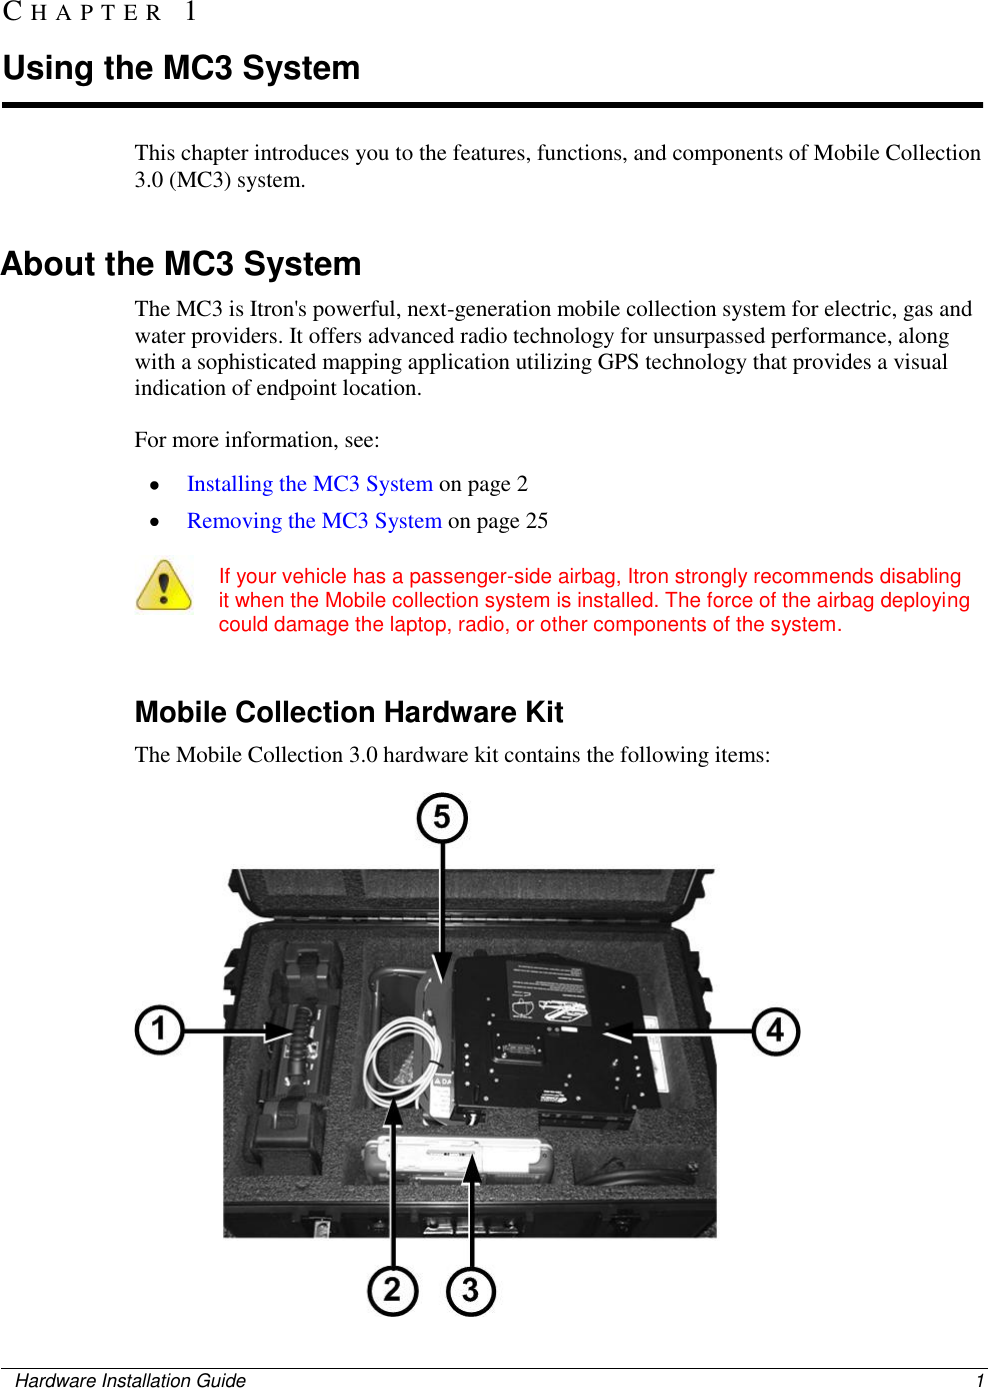    Hardware Installation Guide  1  This chapter introduces you to the features, functions, and components of Mobile Collection 3.0 (MC3) system.    About the MC3 System The MC3 is Itron&apos;s powerful, next-generation mobile collection system for electric, gas and water providers. It offers advanced radio technology for unsurpassed performance, along with a sophisticated mapping application utilizing GPS technology that provides a visual indication of endpoint location.  For more information, see:  Installing the MC3 System on page 2  Removing the MC3 System on page 25    If your vehicle has a passenger-side airbag, Itron strongly recommends disabling it when the Mobile collection system is installed. The force of the airbag deploying could damage the laptop, radio, or other components of the system.     Mobile Collection Hardware Kit The Mobile Collection 3.0 hardware kit contains the following items:  CH A P T E R   1  Using the MC3 System 